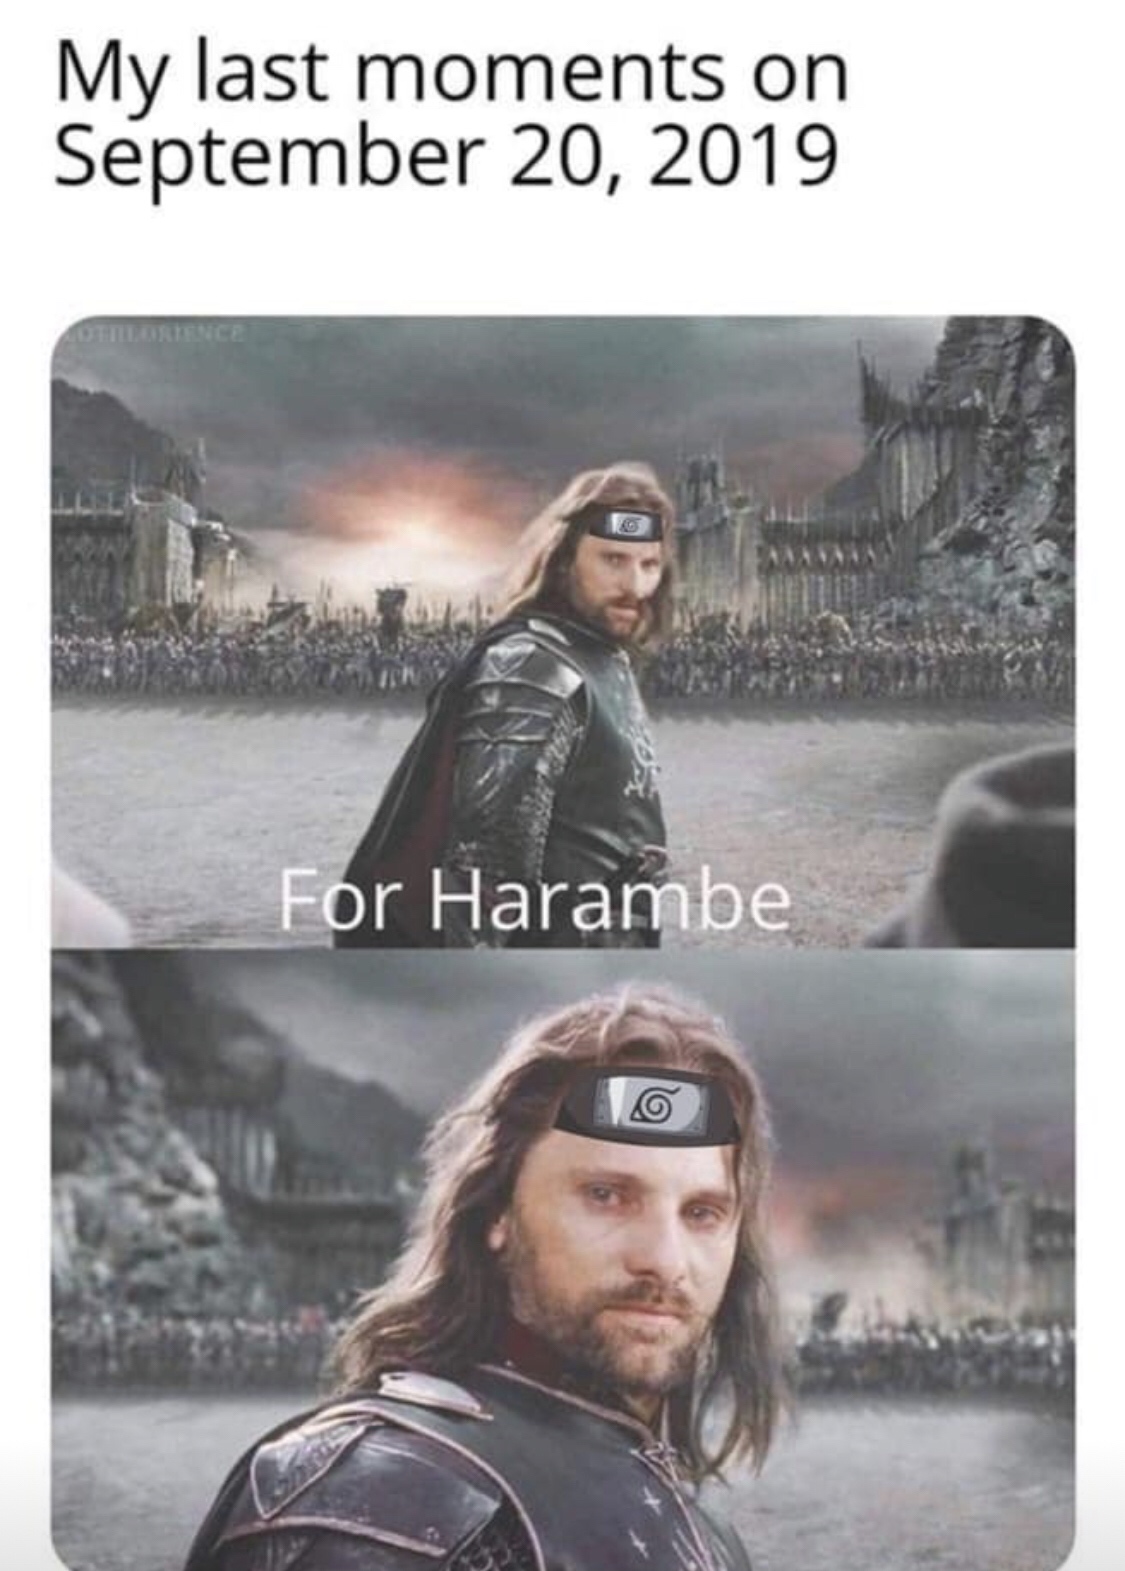 memes september 2019 - My last moments on For Harambe